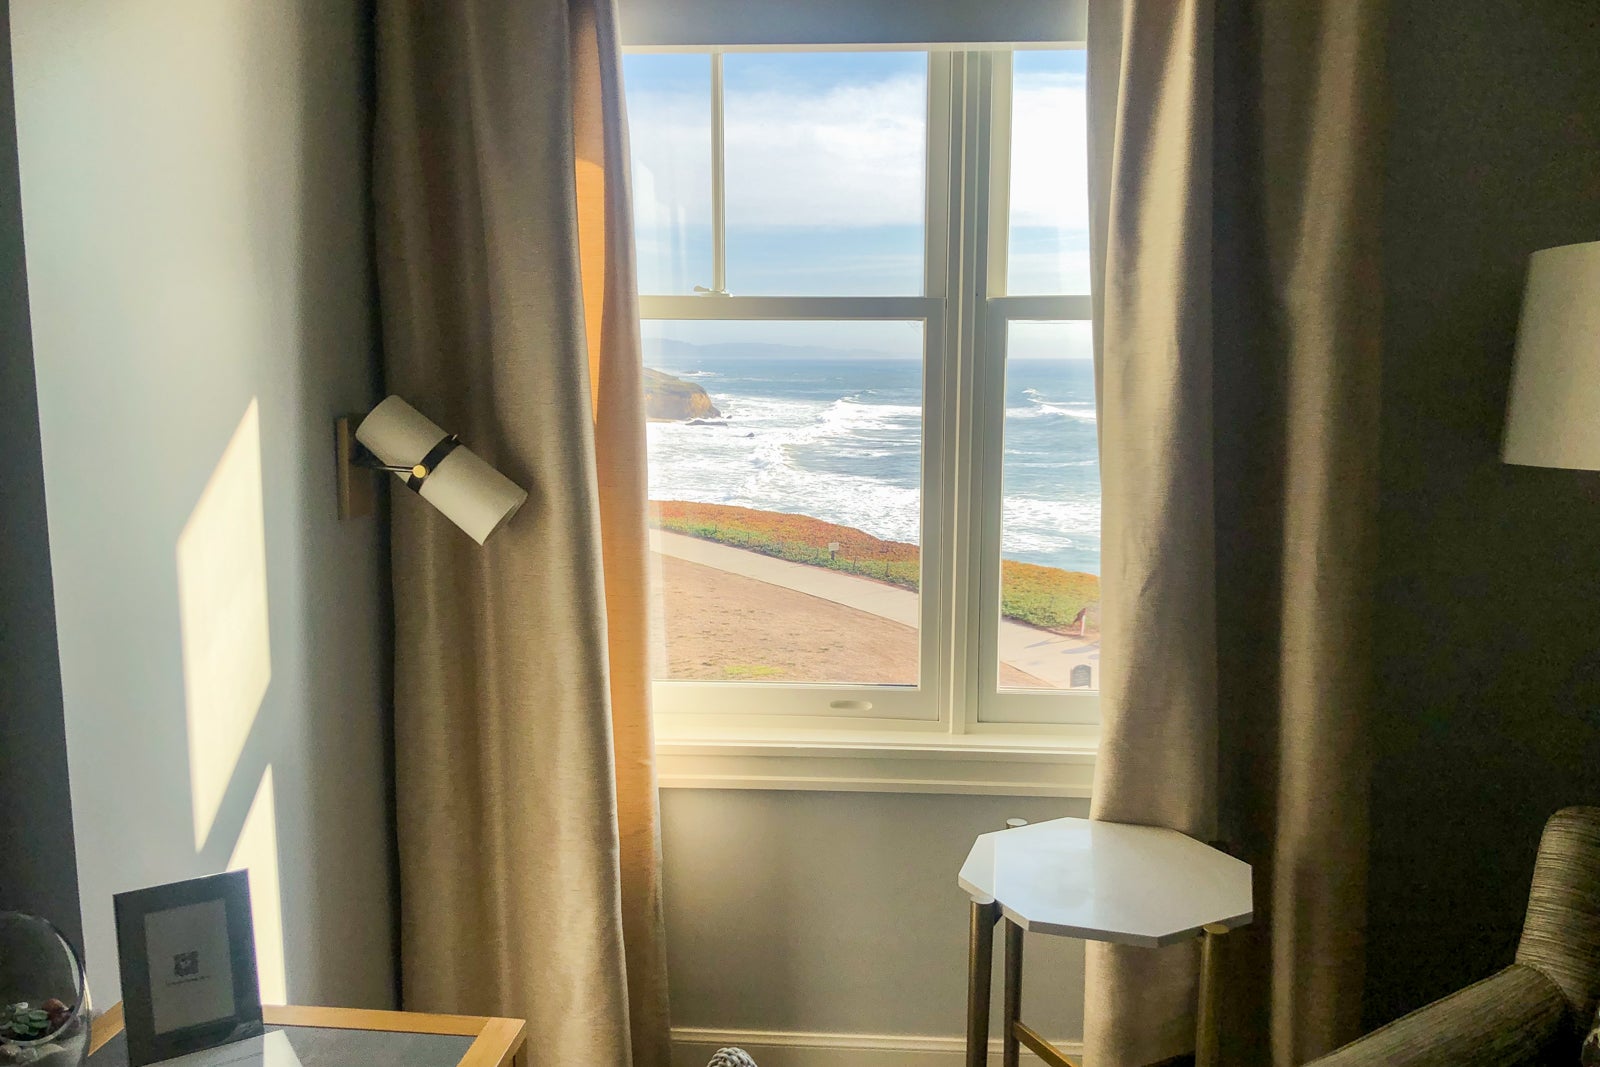 Photo of the view from the guest room at The Ritz-Carlton Half Moon Bay overlooking the Pacific Ocean.